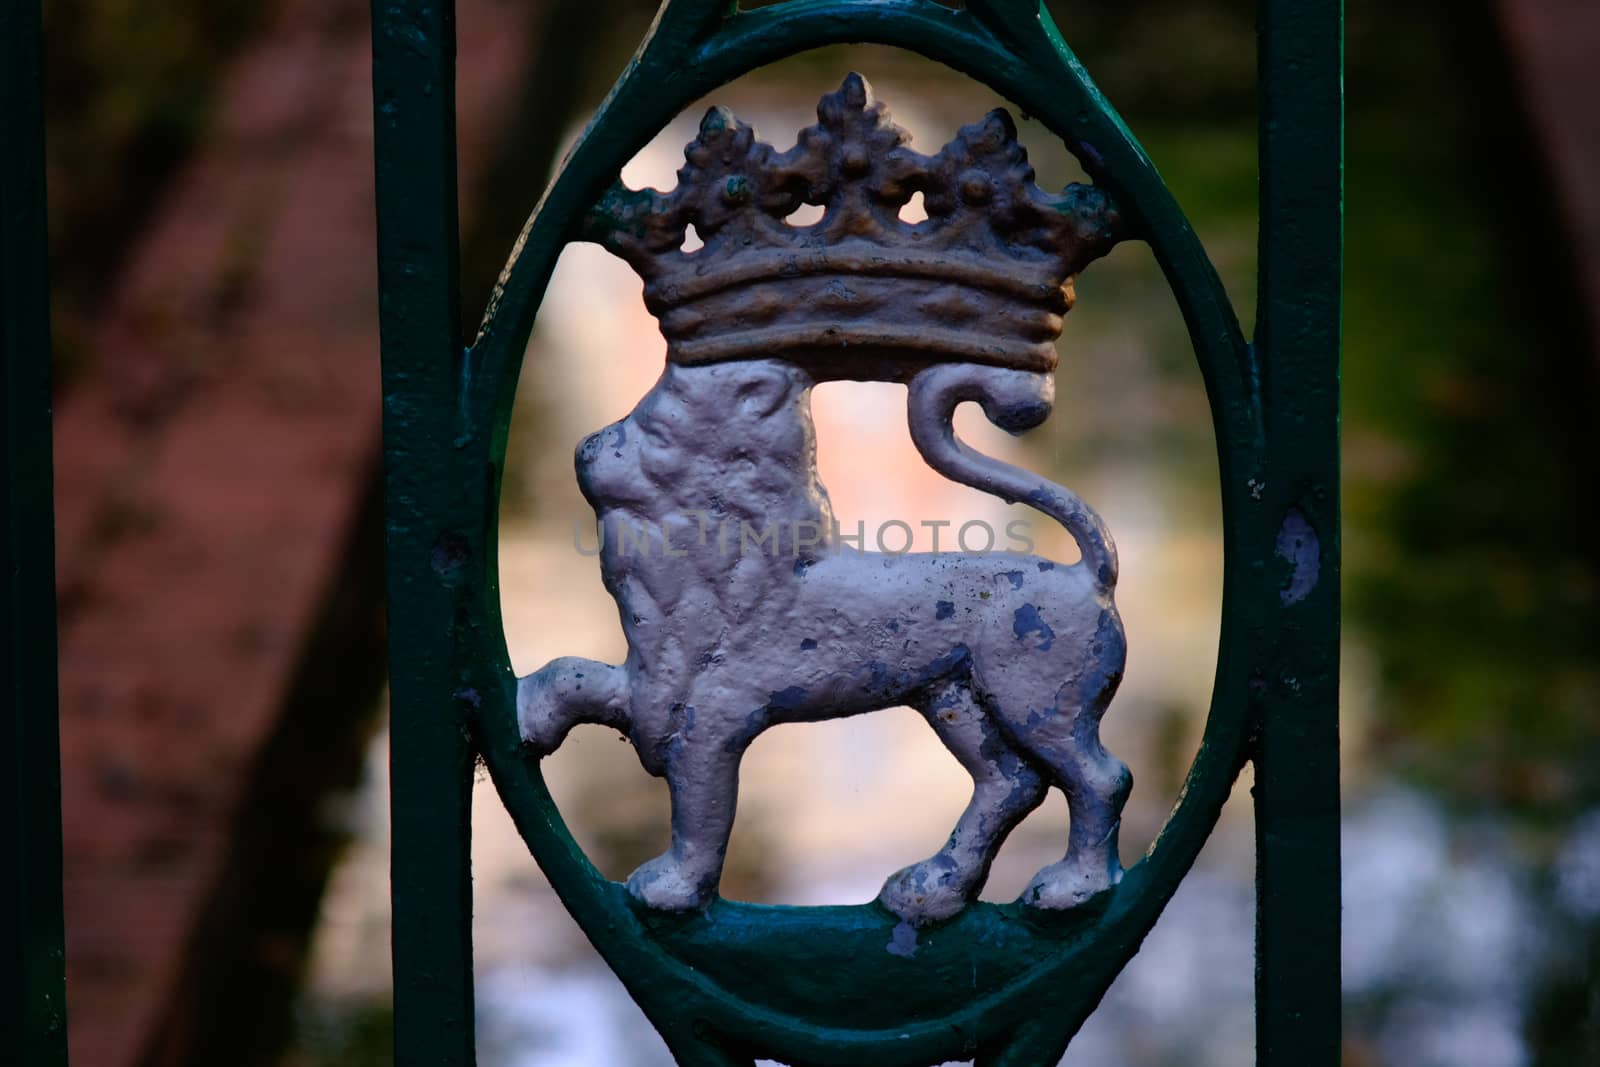 Typical lion metal figure from public fences in Pamplona, Spain by mikelju